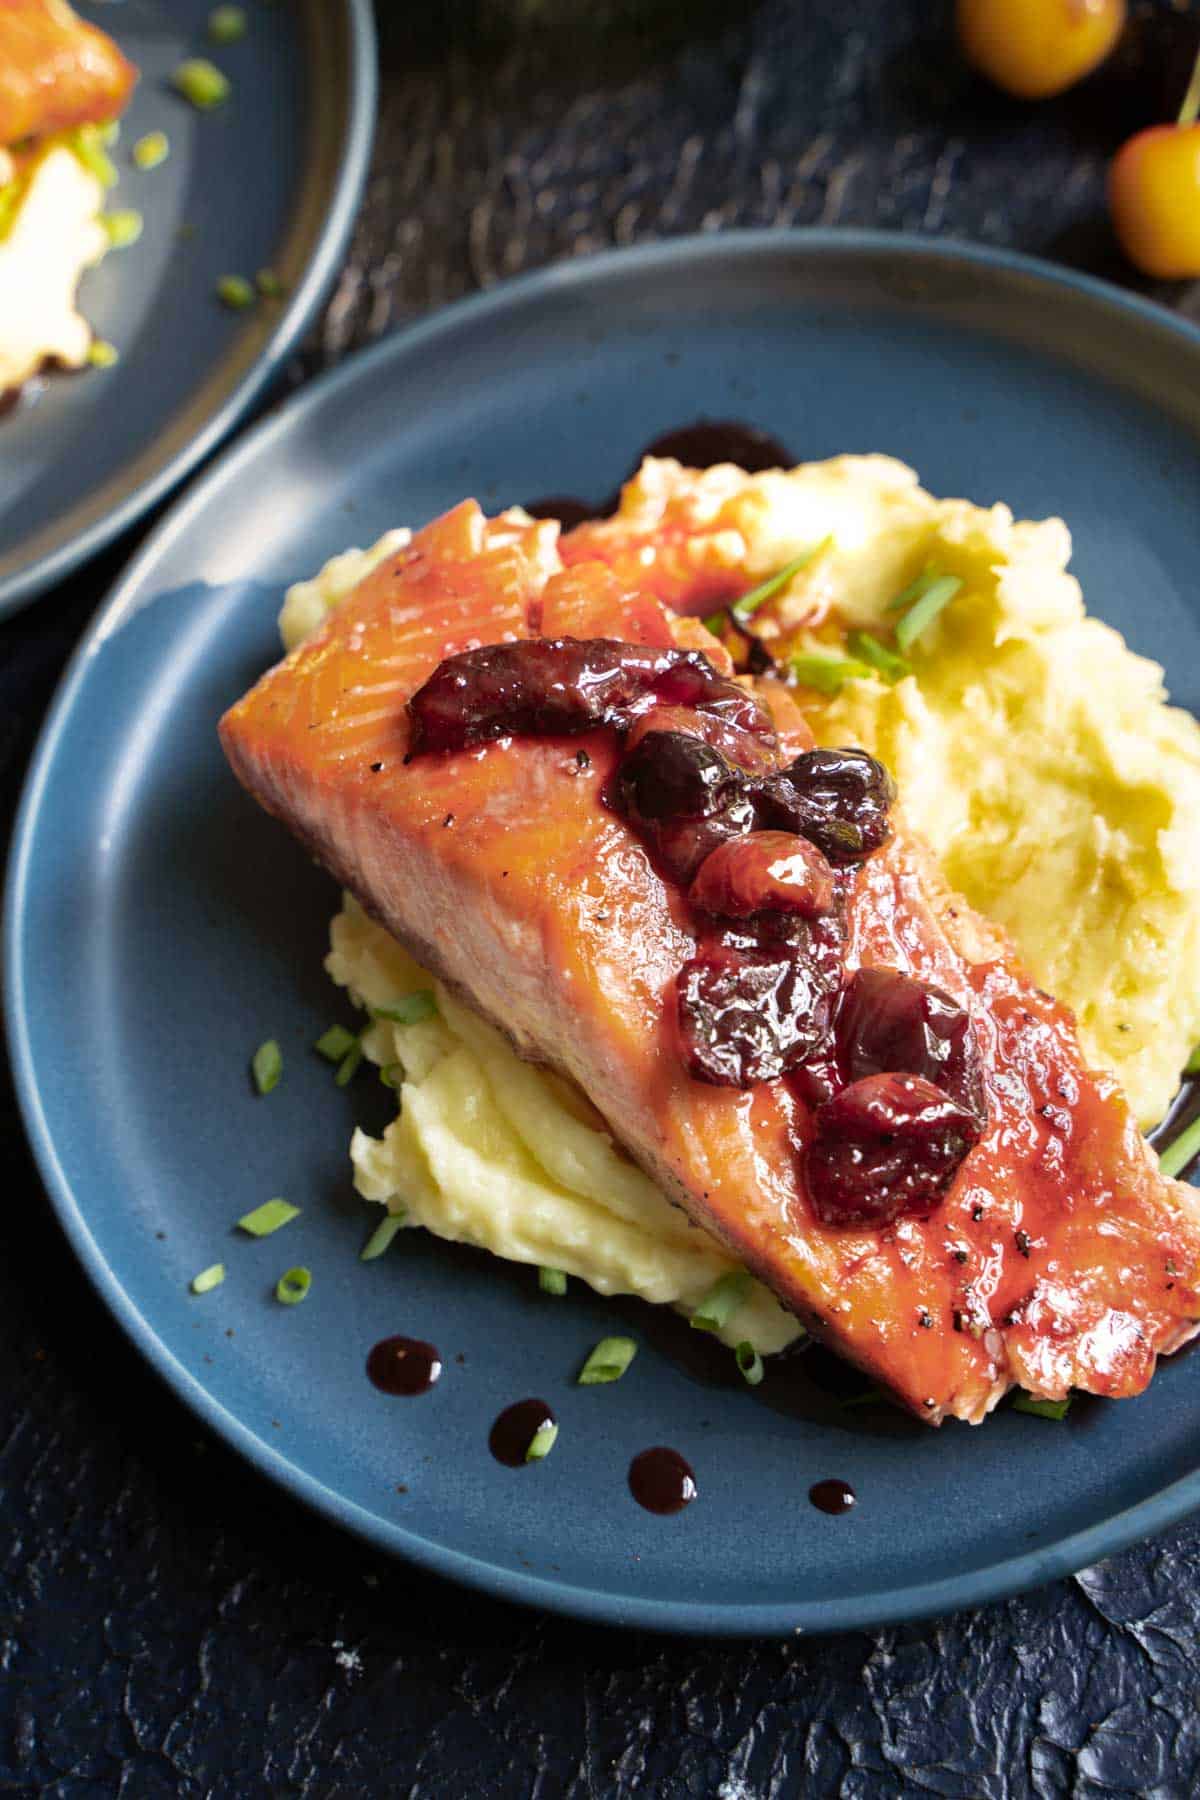 Baked salmon with cherry glaze on a blue plate served over mashed potatoes